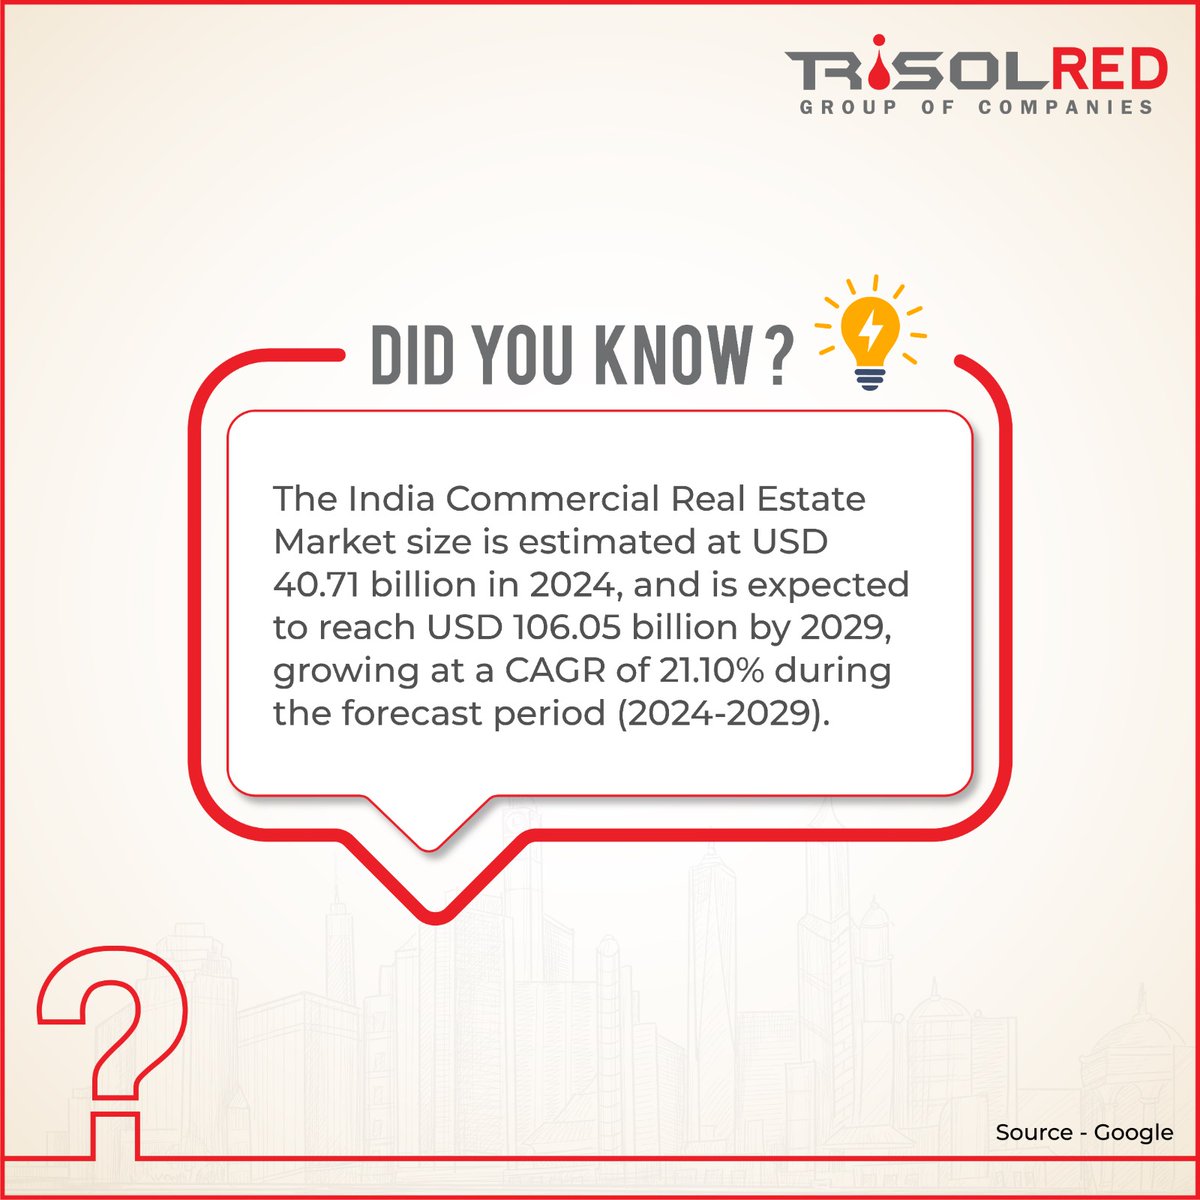 #DidYouKnow

The dynamic world of Indian commercial real estate is projected to reach new heights, and the market is set to soar from USD 40.71 billion to a staggering USD 106.05 billion by 2029. 📈 
Source: Google 

#Trisol #TrisolRED #RealEstate #RealEstateRevolution